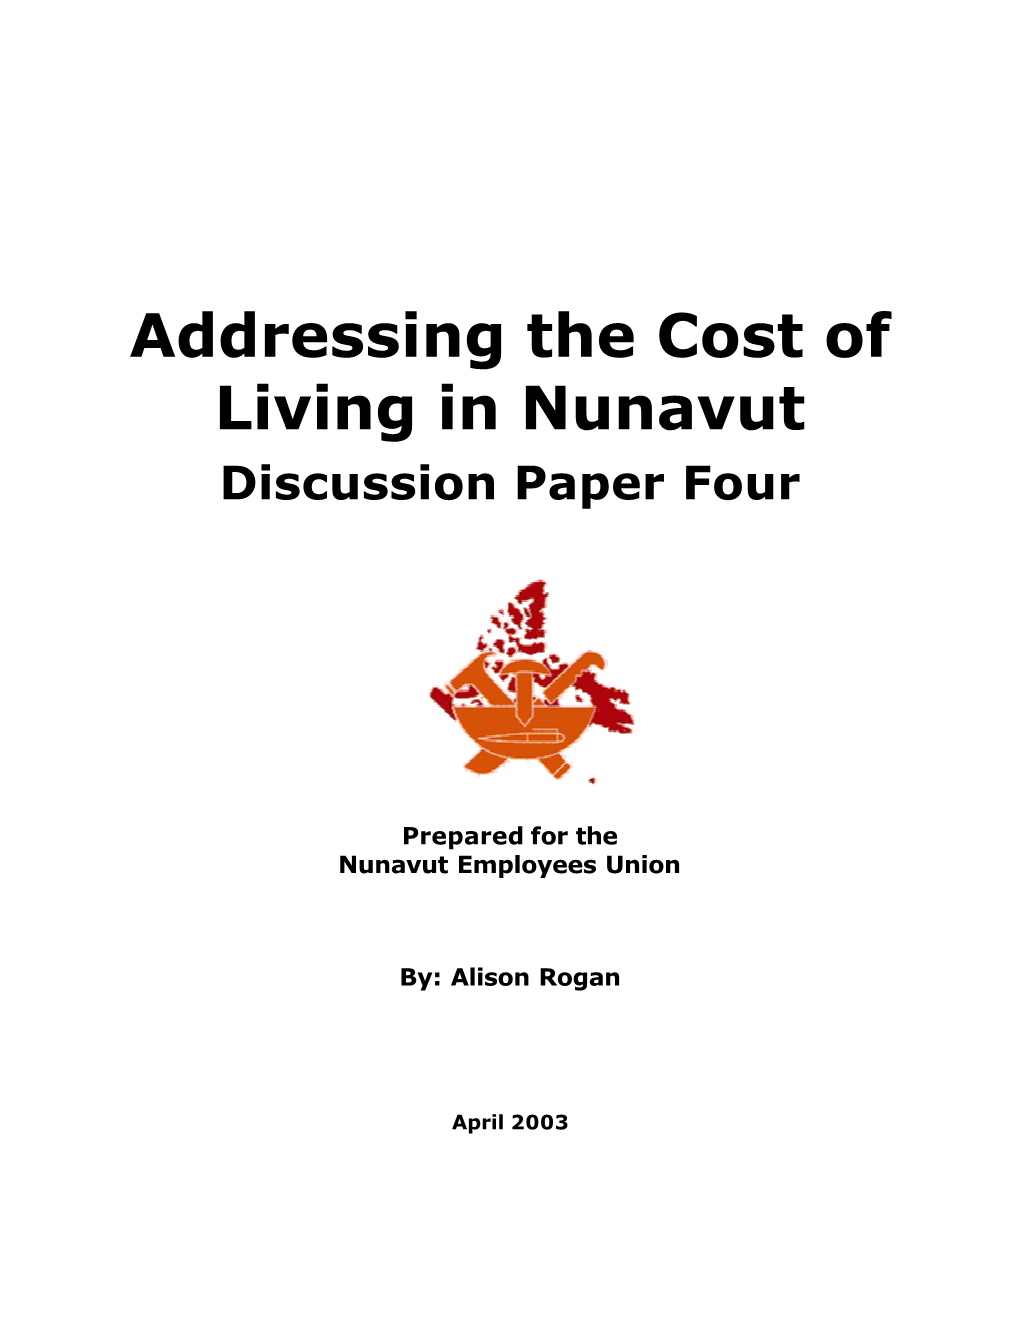 Addressing the Cost of Living in Nunavut Discussion Paper Four